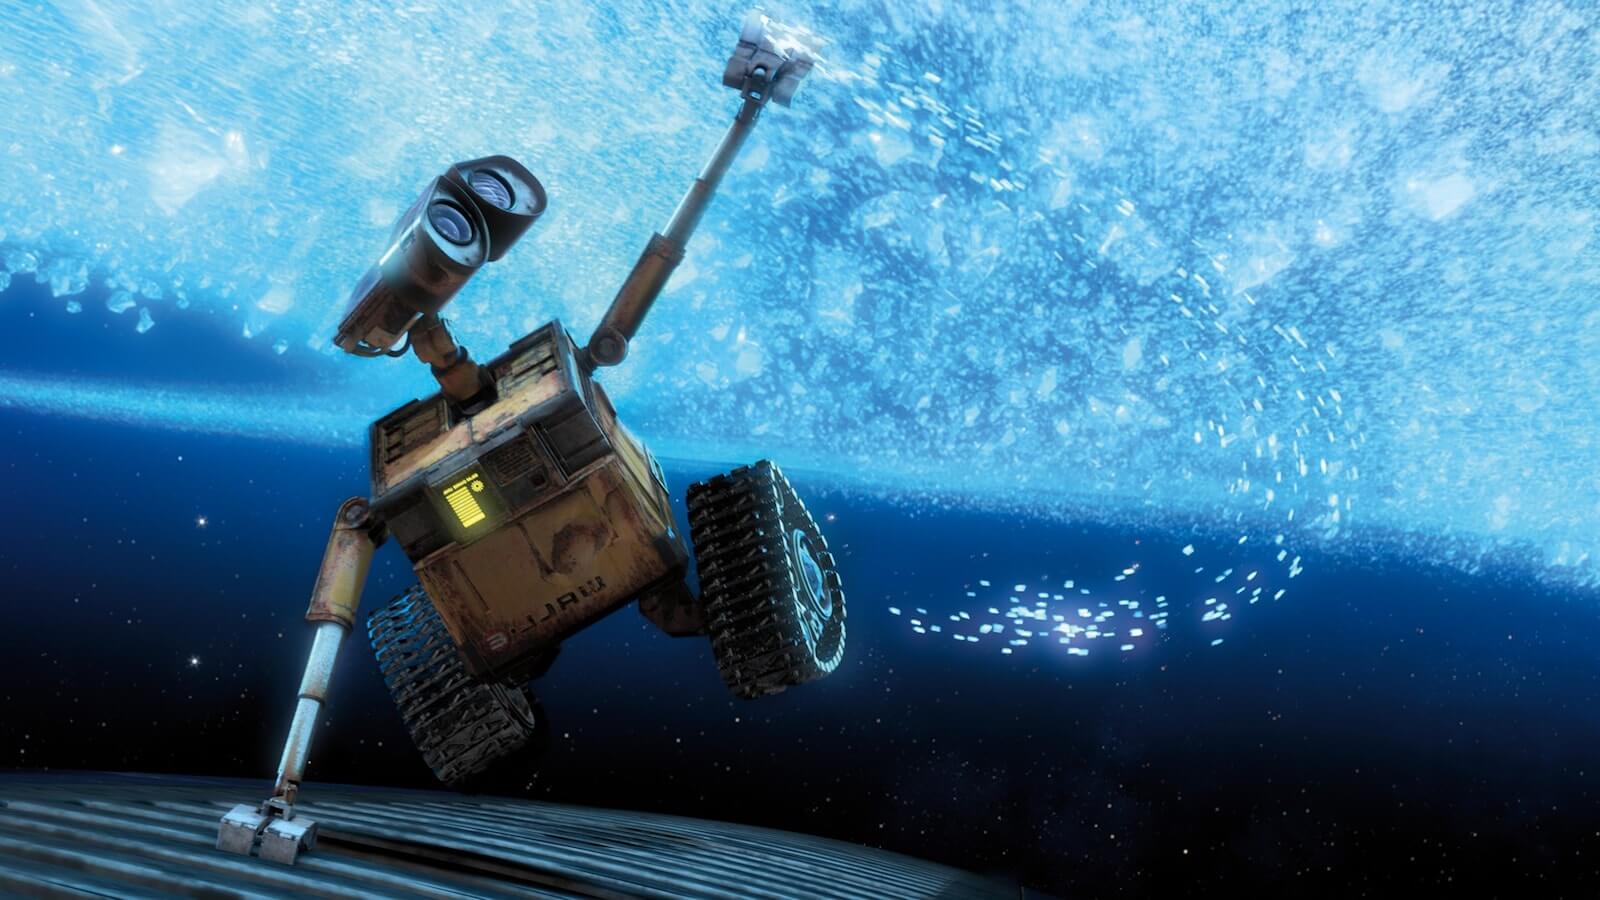 Internal and External Conflict - Wall-E